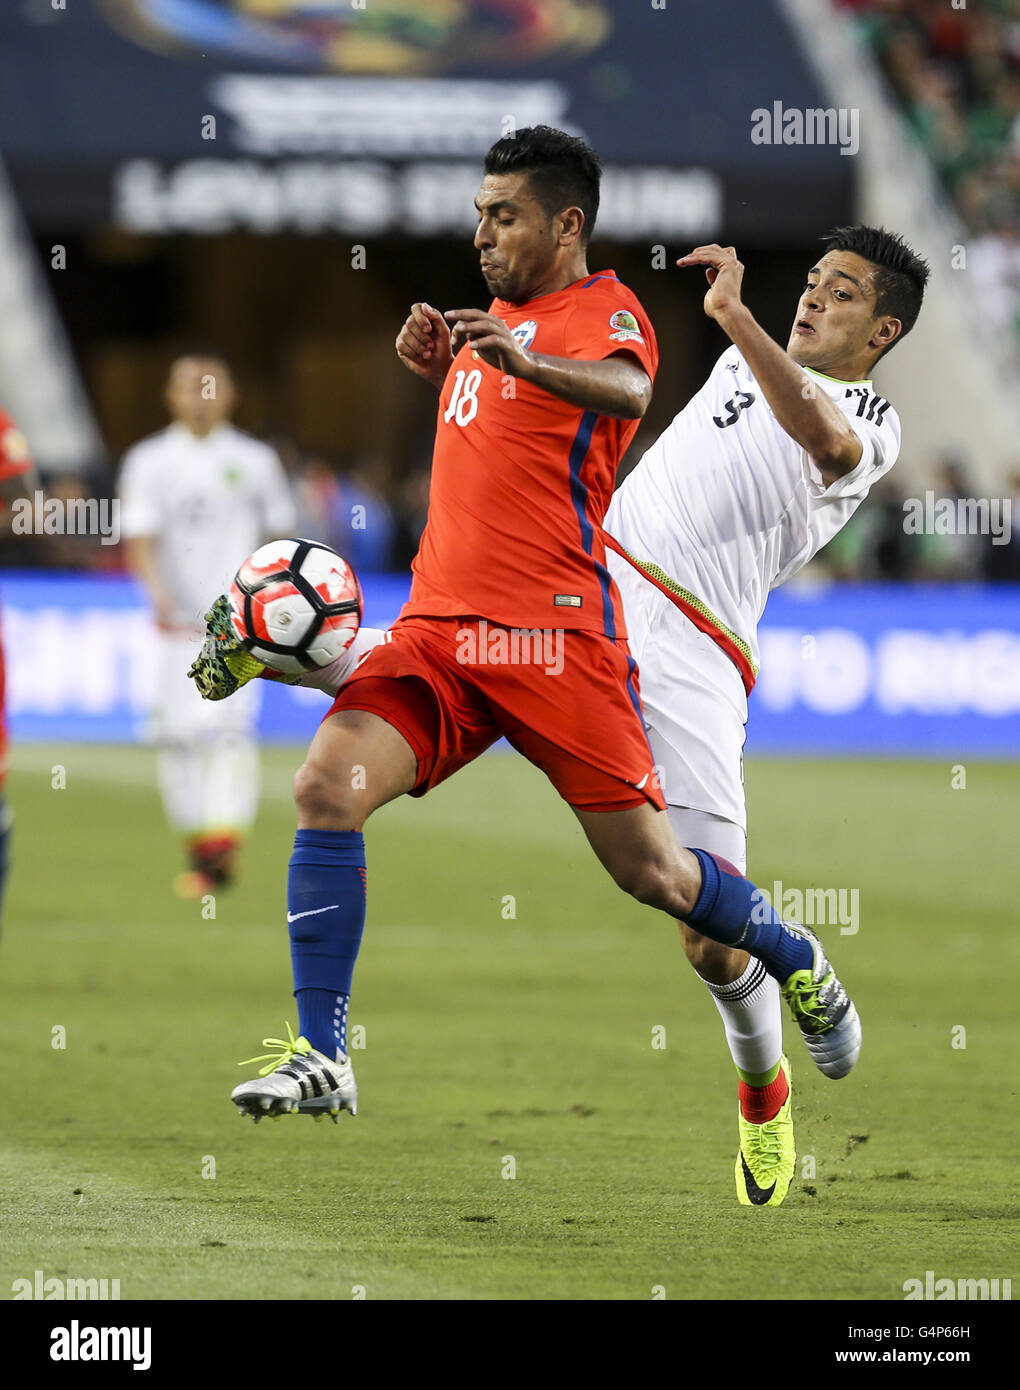 Los Angeles, California, USA. 18th June, 2016. Chile defender Gonzalo Jara #18 vies the ball against Mexico forward Raul Jimenez #9 in the Copa America soccer match between Mexico and Chile at the Levi's Stadium in Santa Clara, California, June 18, 2016. Chile won 7-0. Credit:  Ringo Chiu/ZUMA Wire/Alamy Live News Stock Photo